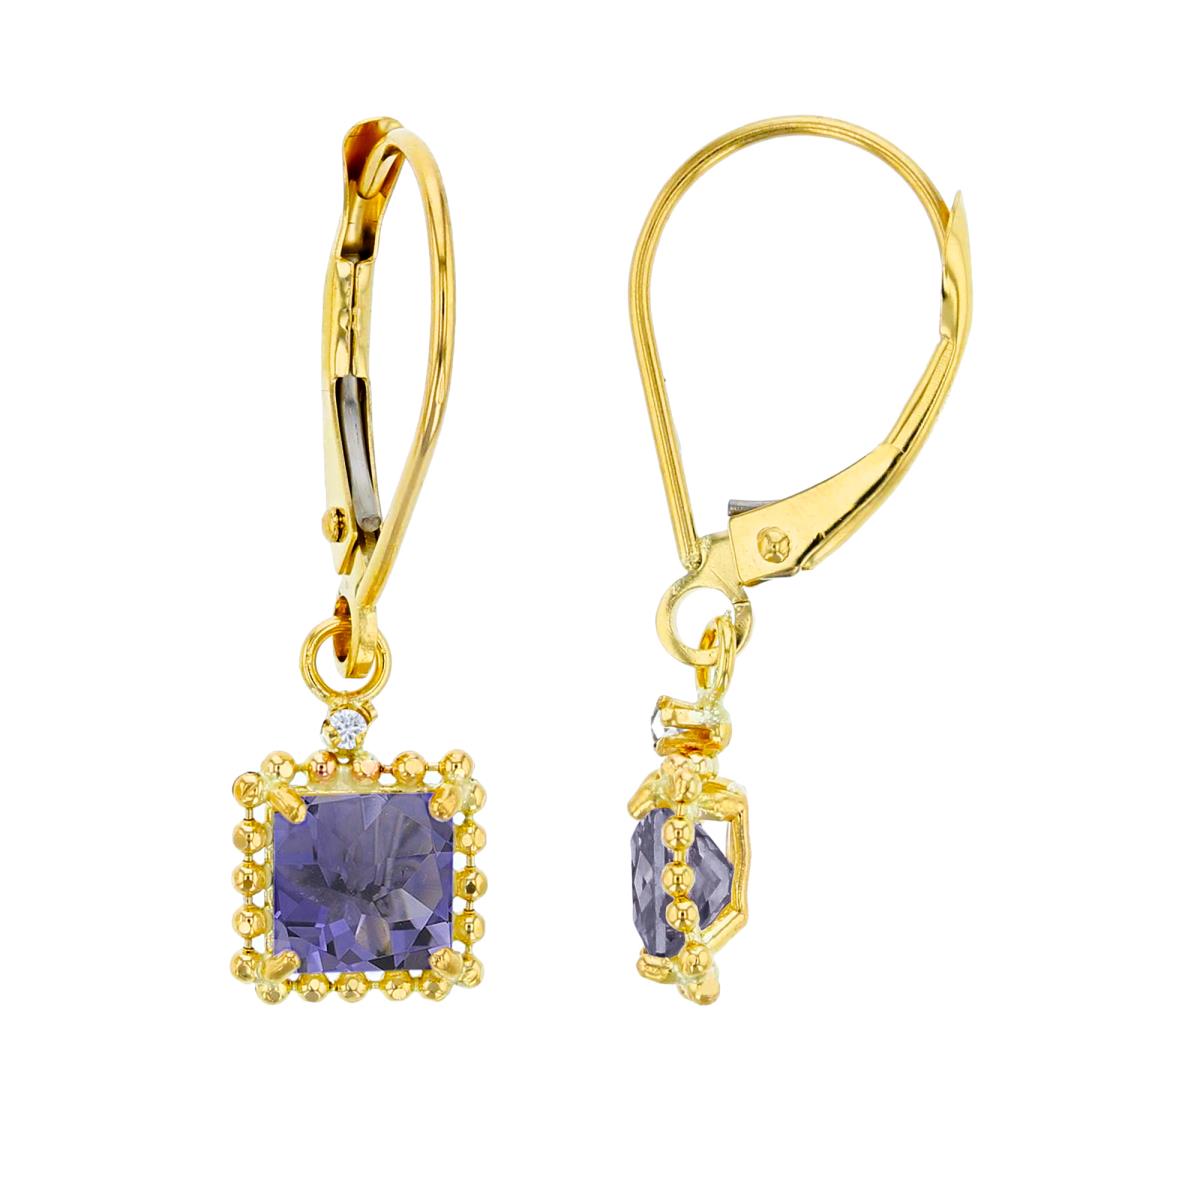 10K Yellow Gold 1.25mm Rd Created White Sapphire & 5mm Sq Iolite Bead Frame Drop Lever-Back Earring